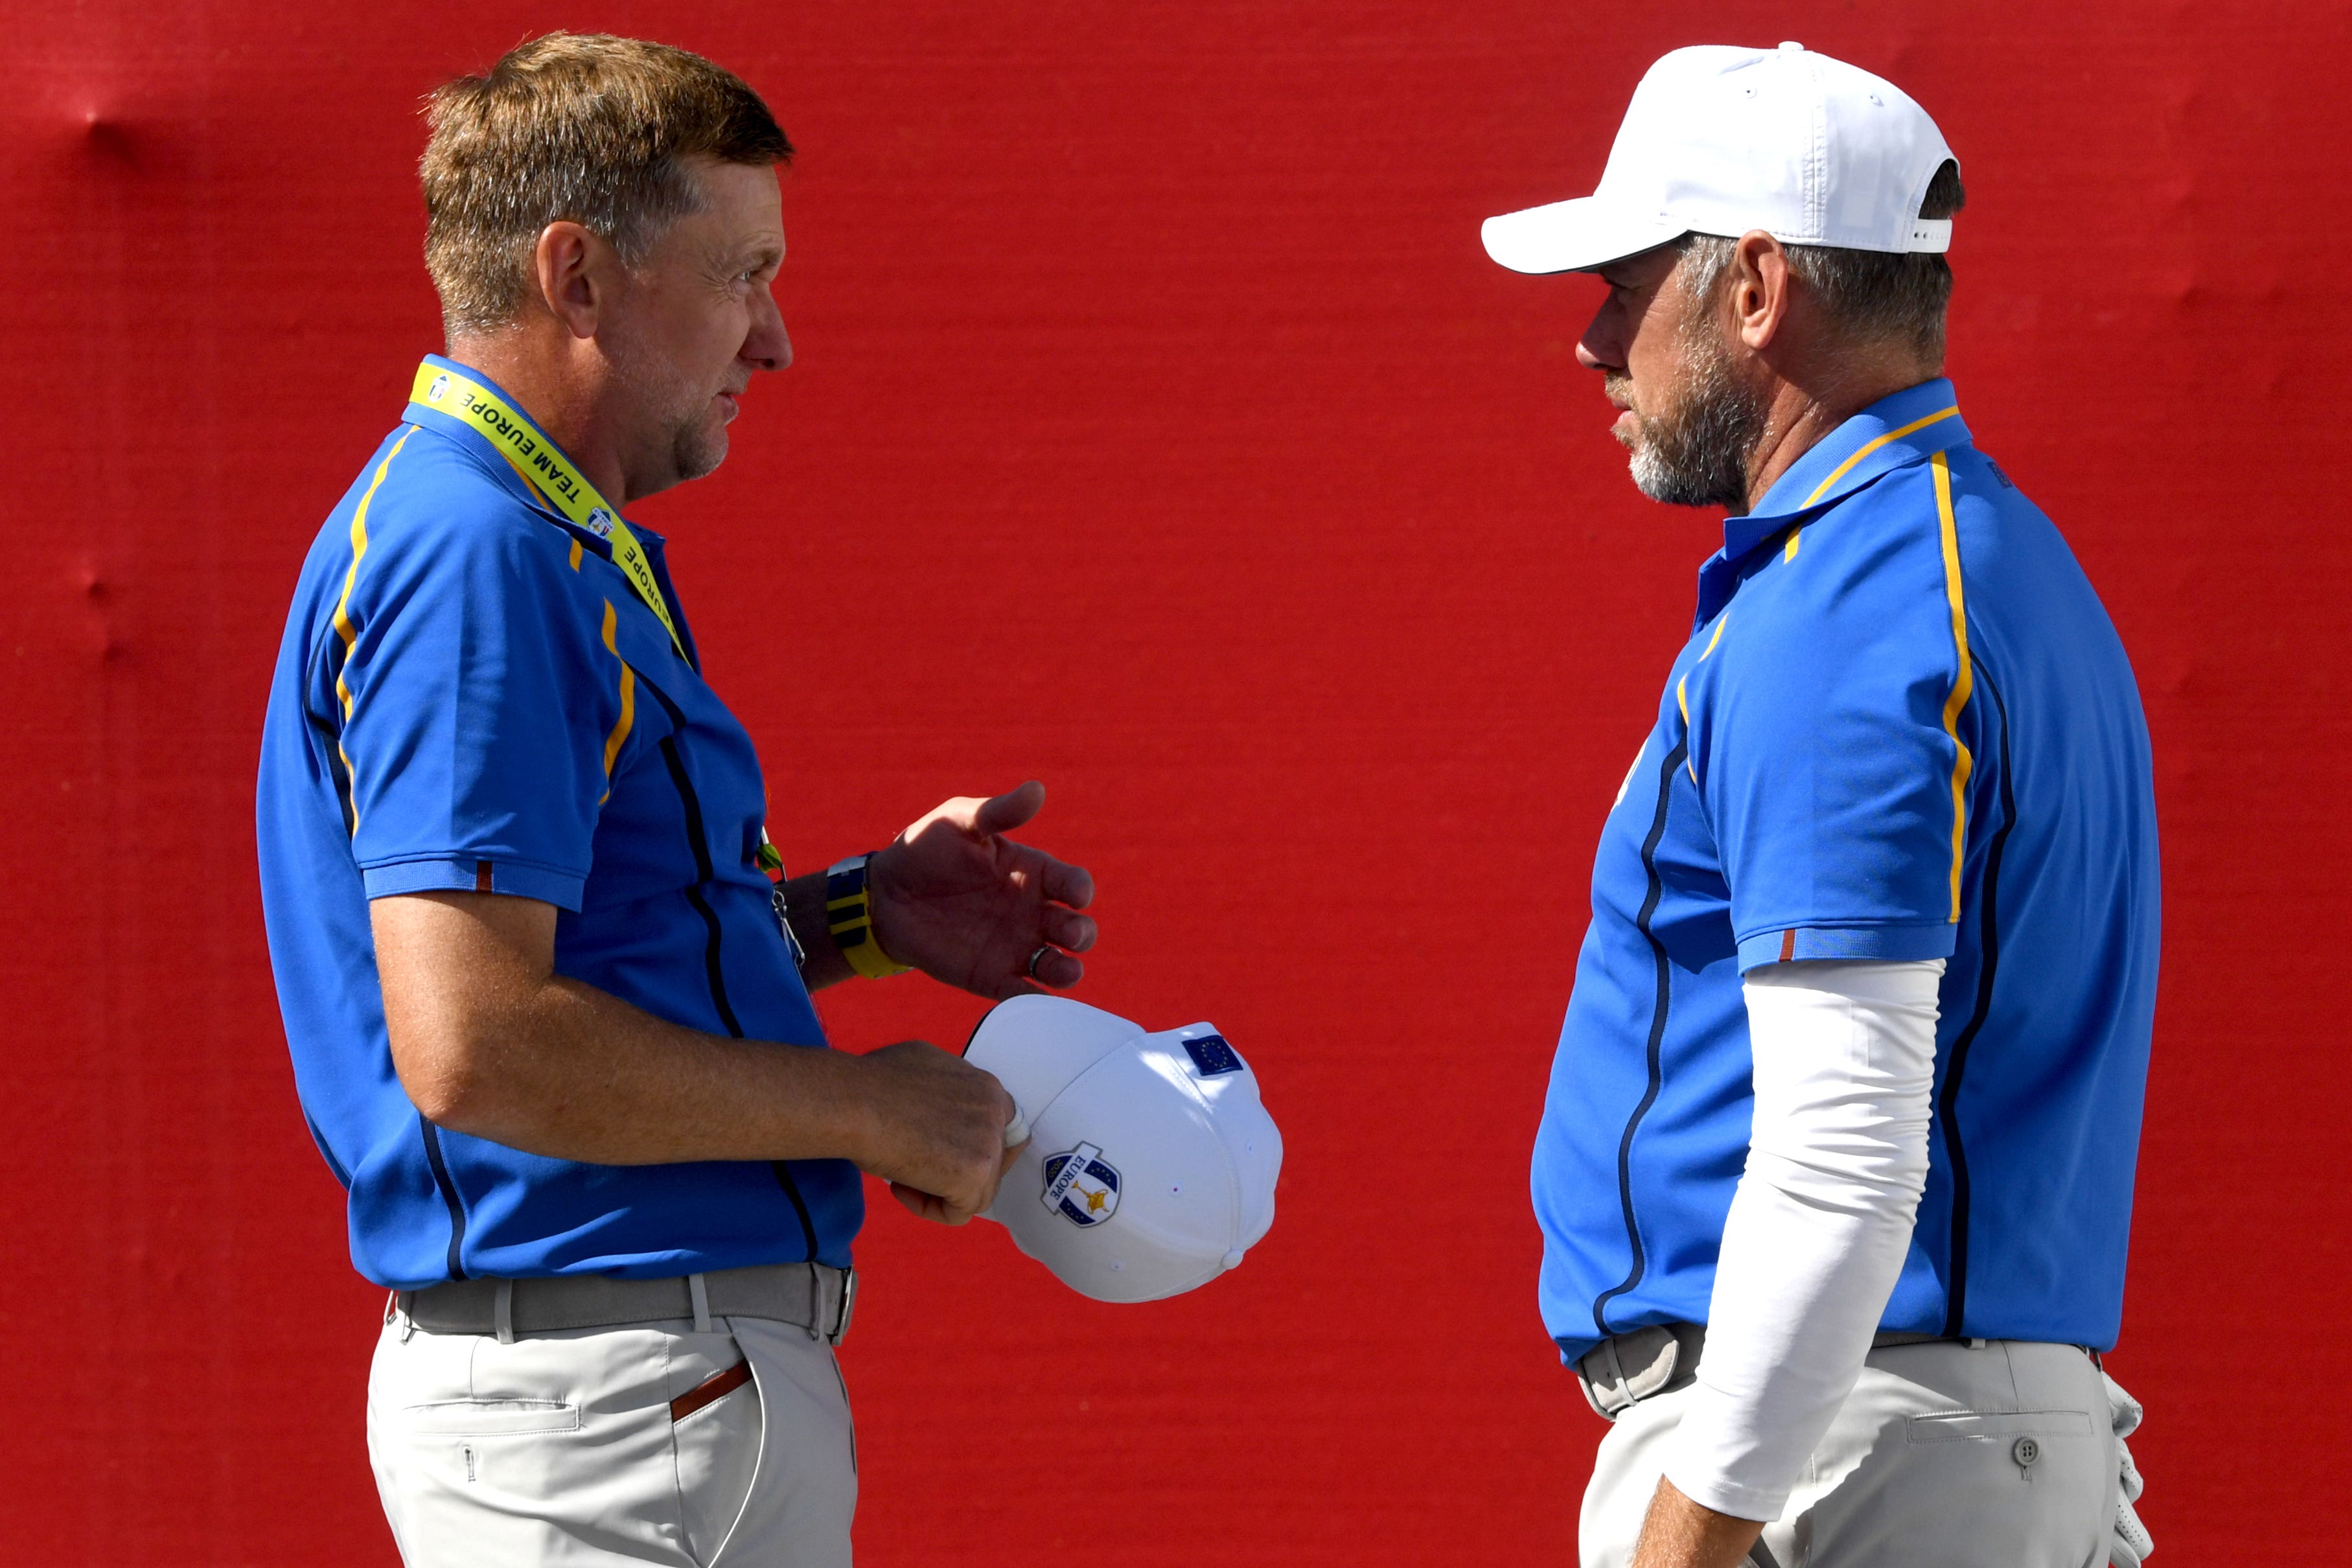 Ian Poulter and Lee Westwood resigned their DP World Tour memberships